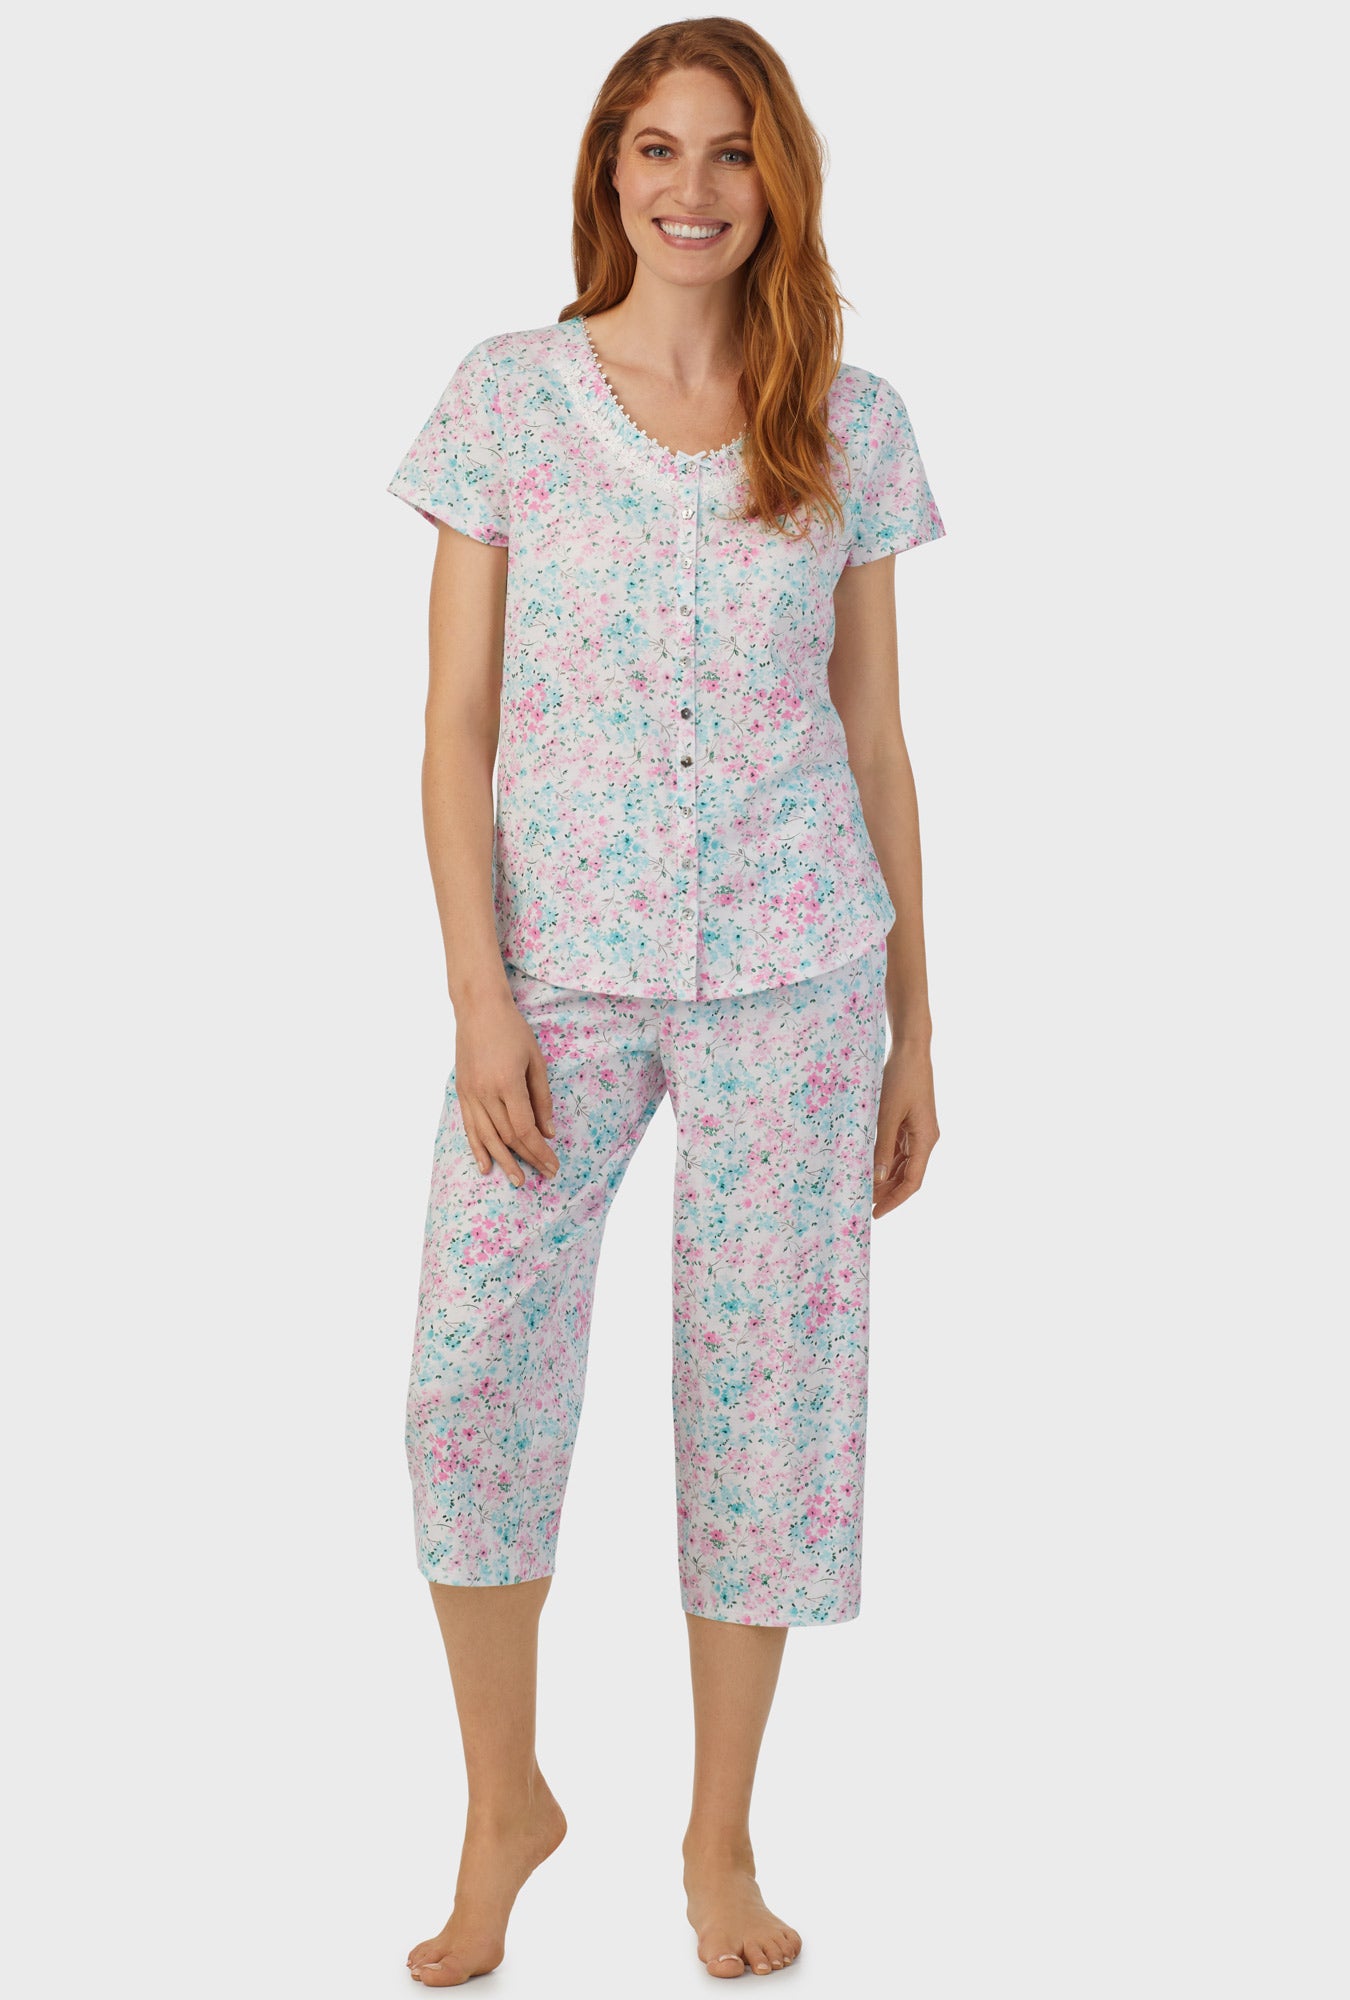 A lady wearing multi color short sleeve capri pant pj set with aqua and pink floral print.